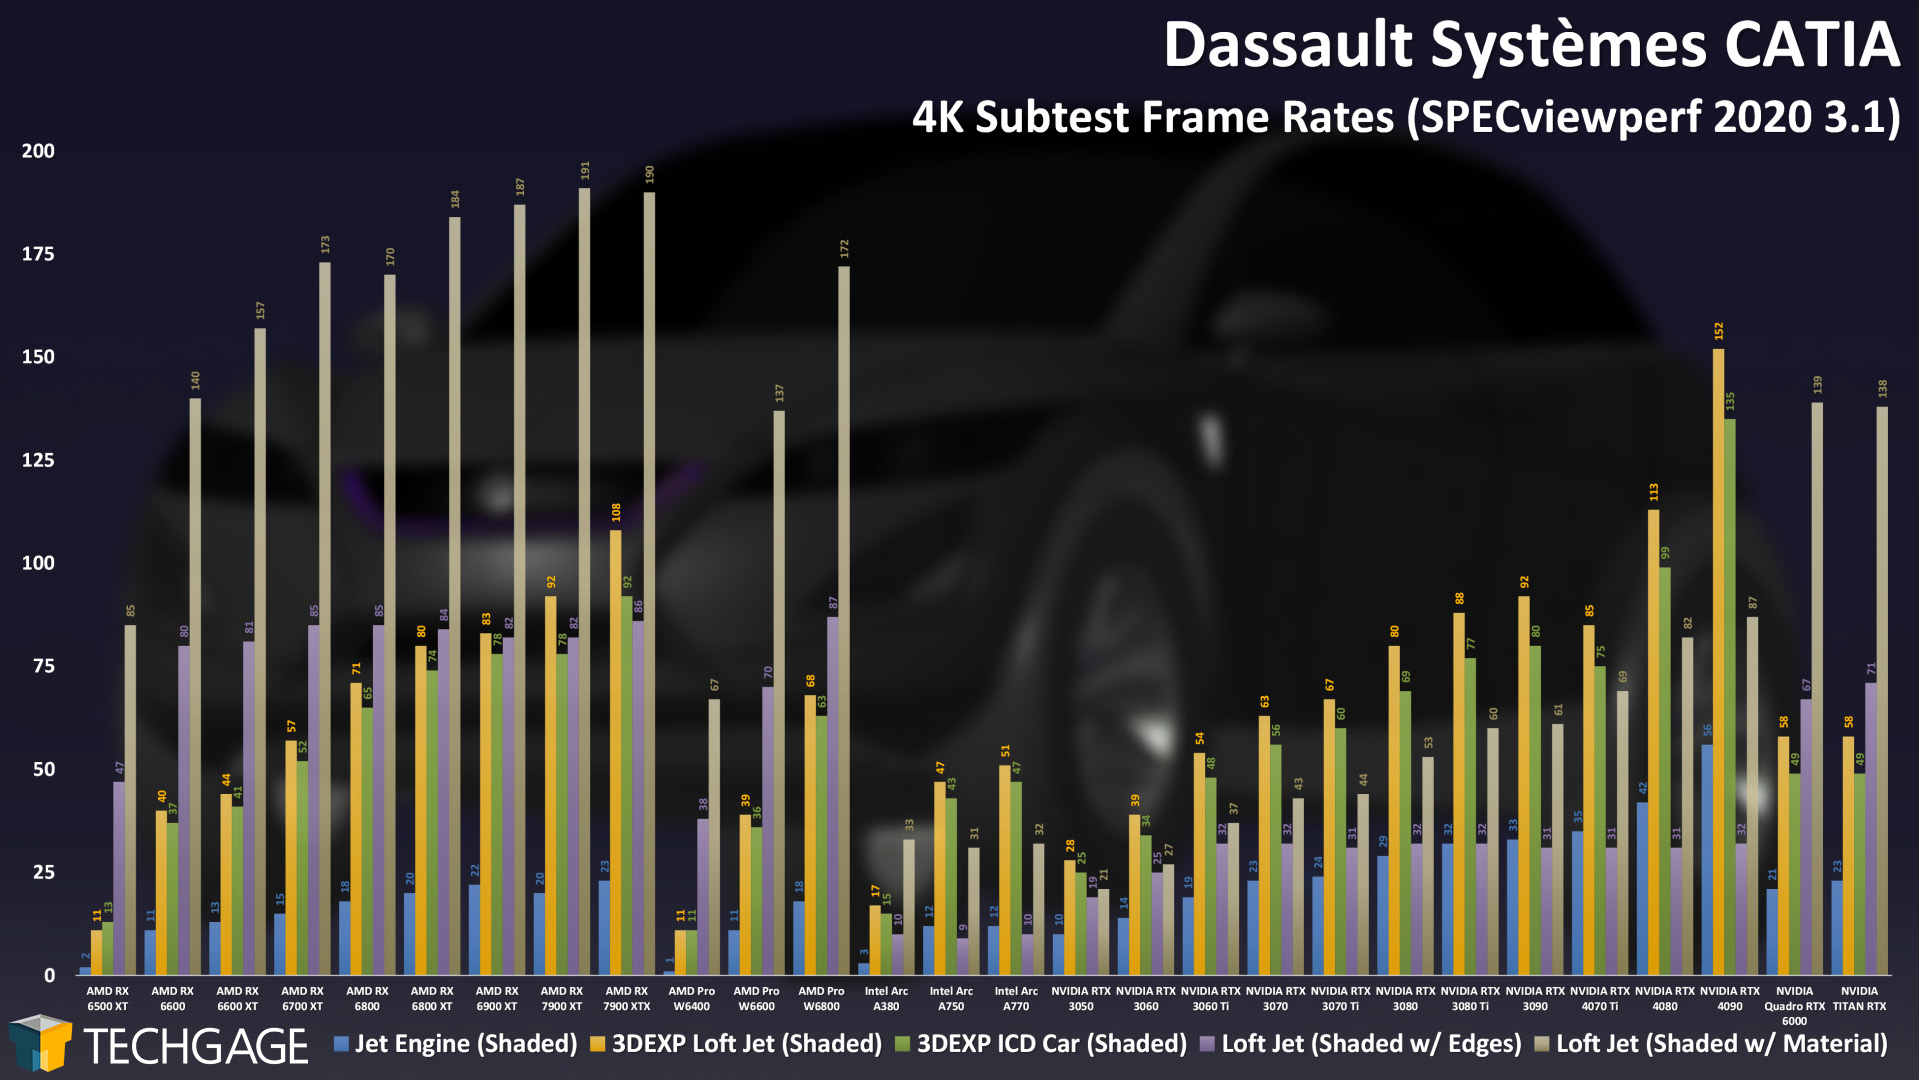 Dassault Systemes CATIA - 2160p Viewport Performance (Subtests)